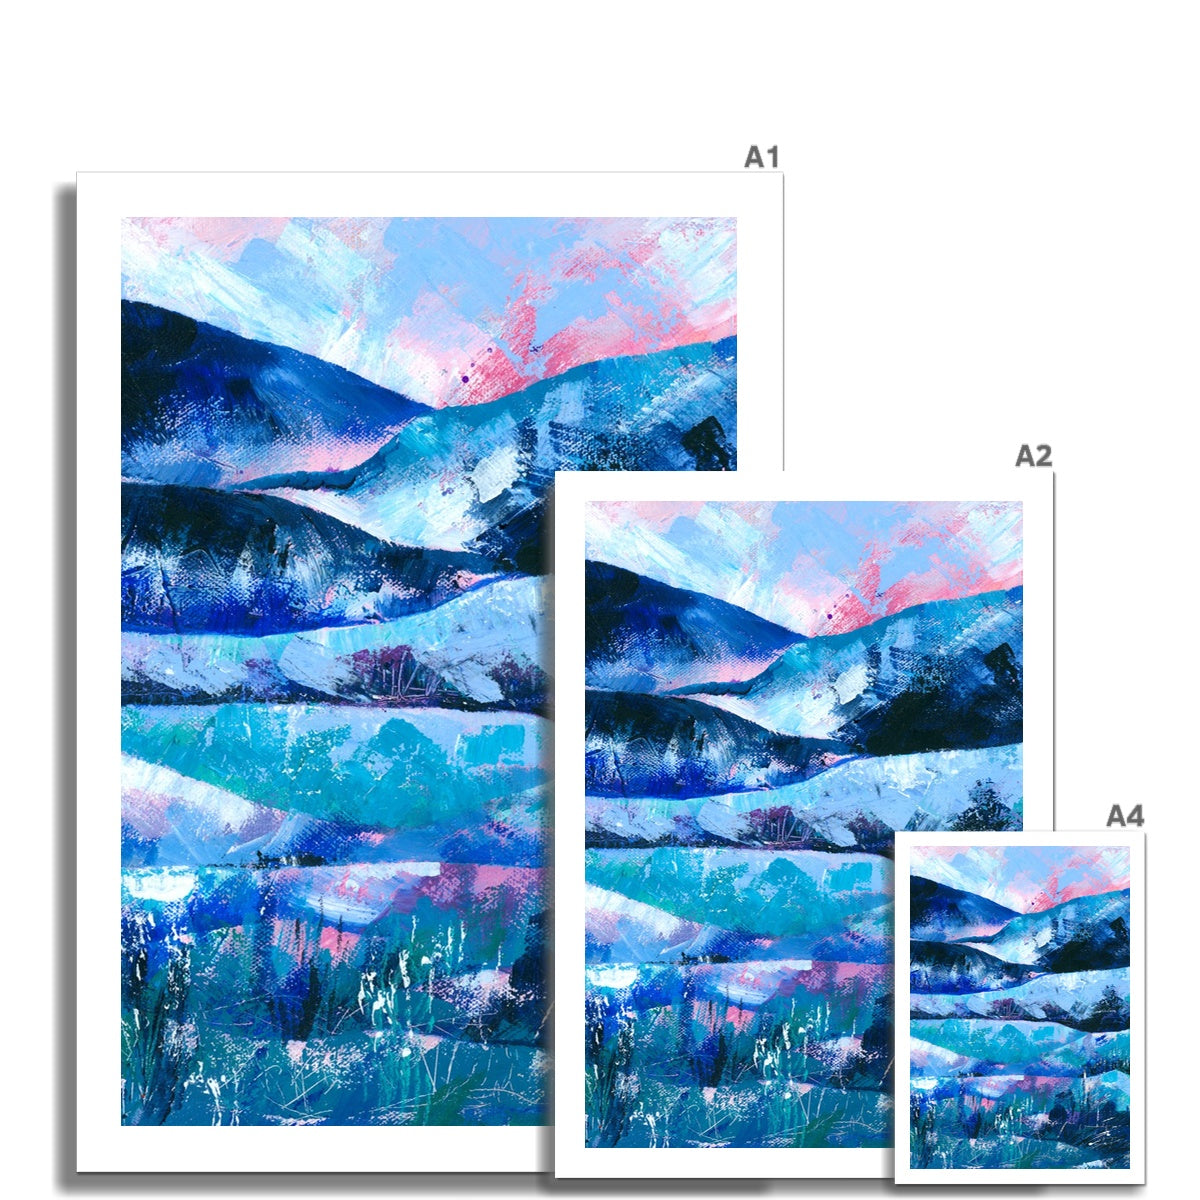 Tranquility fine rectangular art print shown in different sizes, to scale with one another.